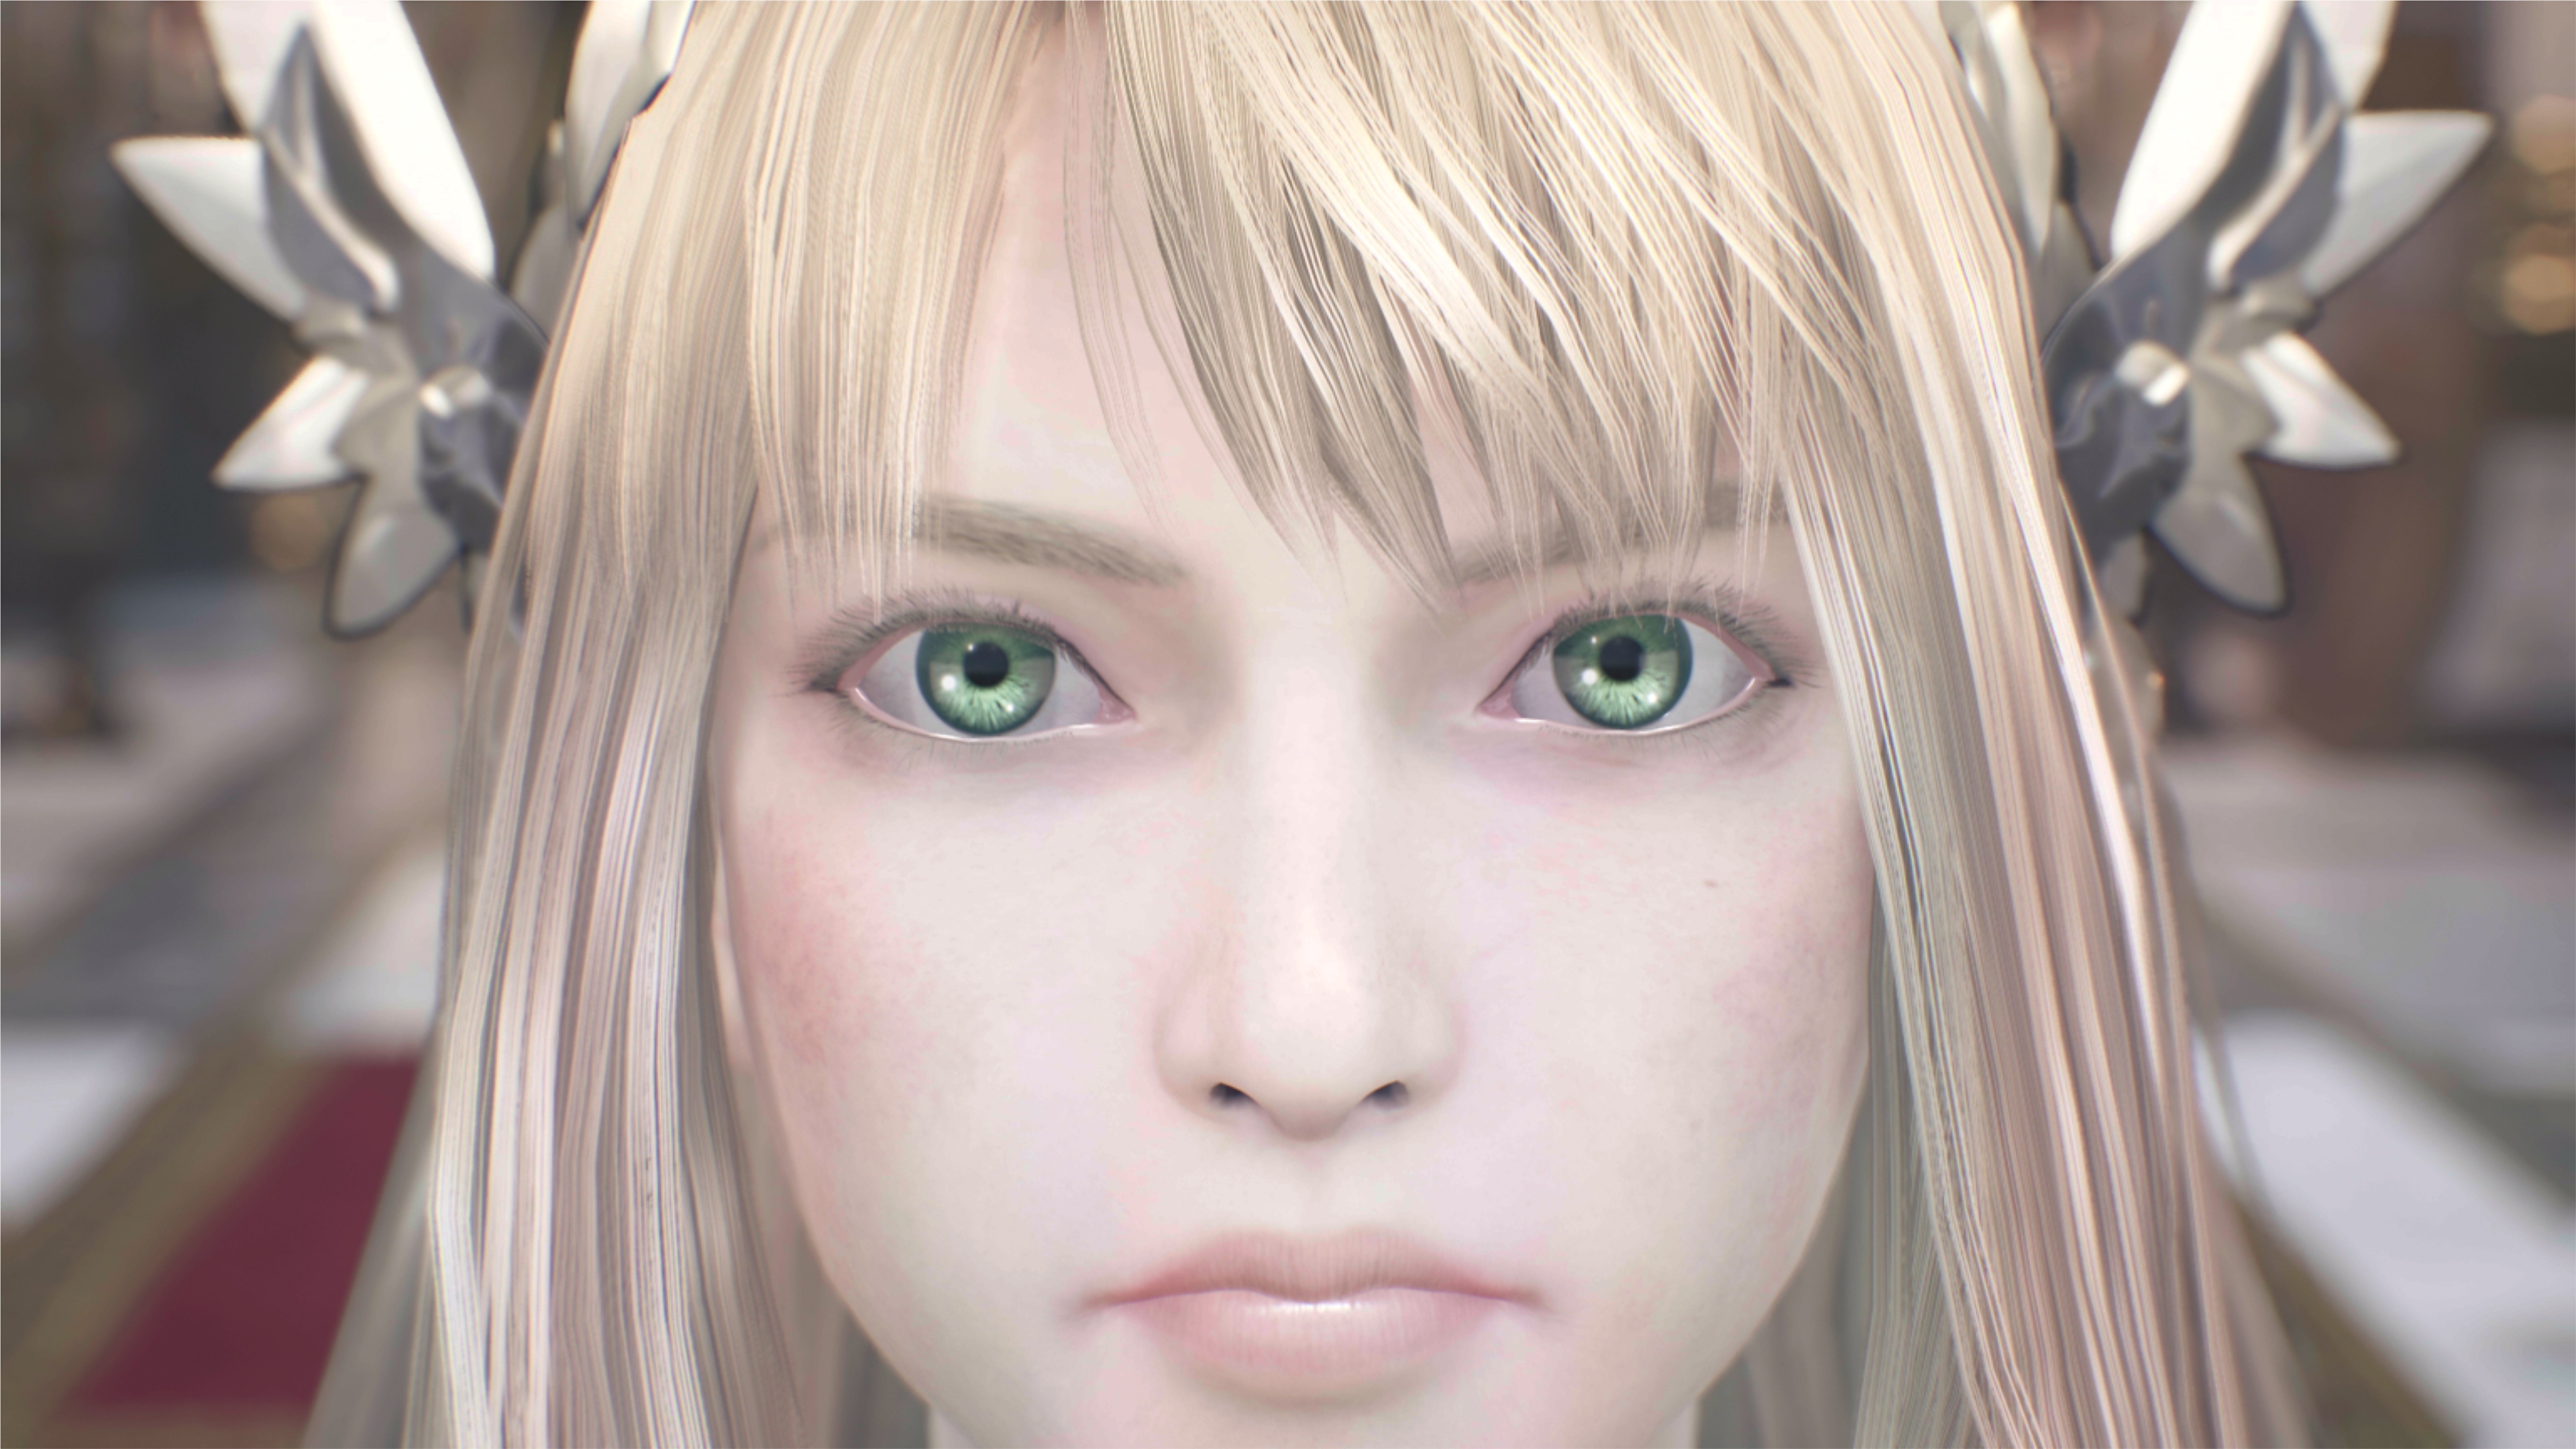 Valkyrie Elysium screenshot showing close up image of character with blonde hair and green eyes